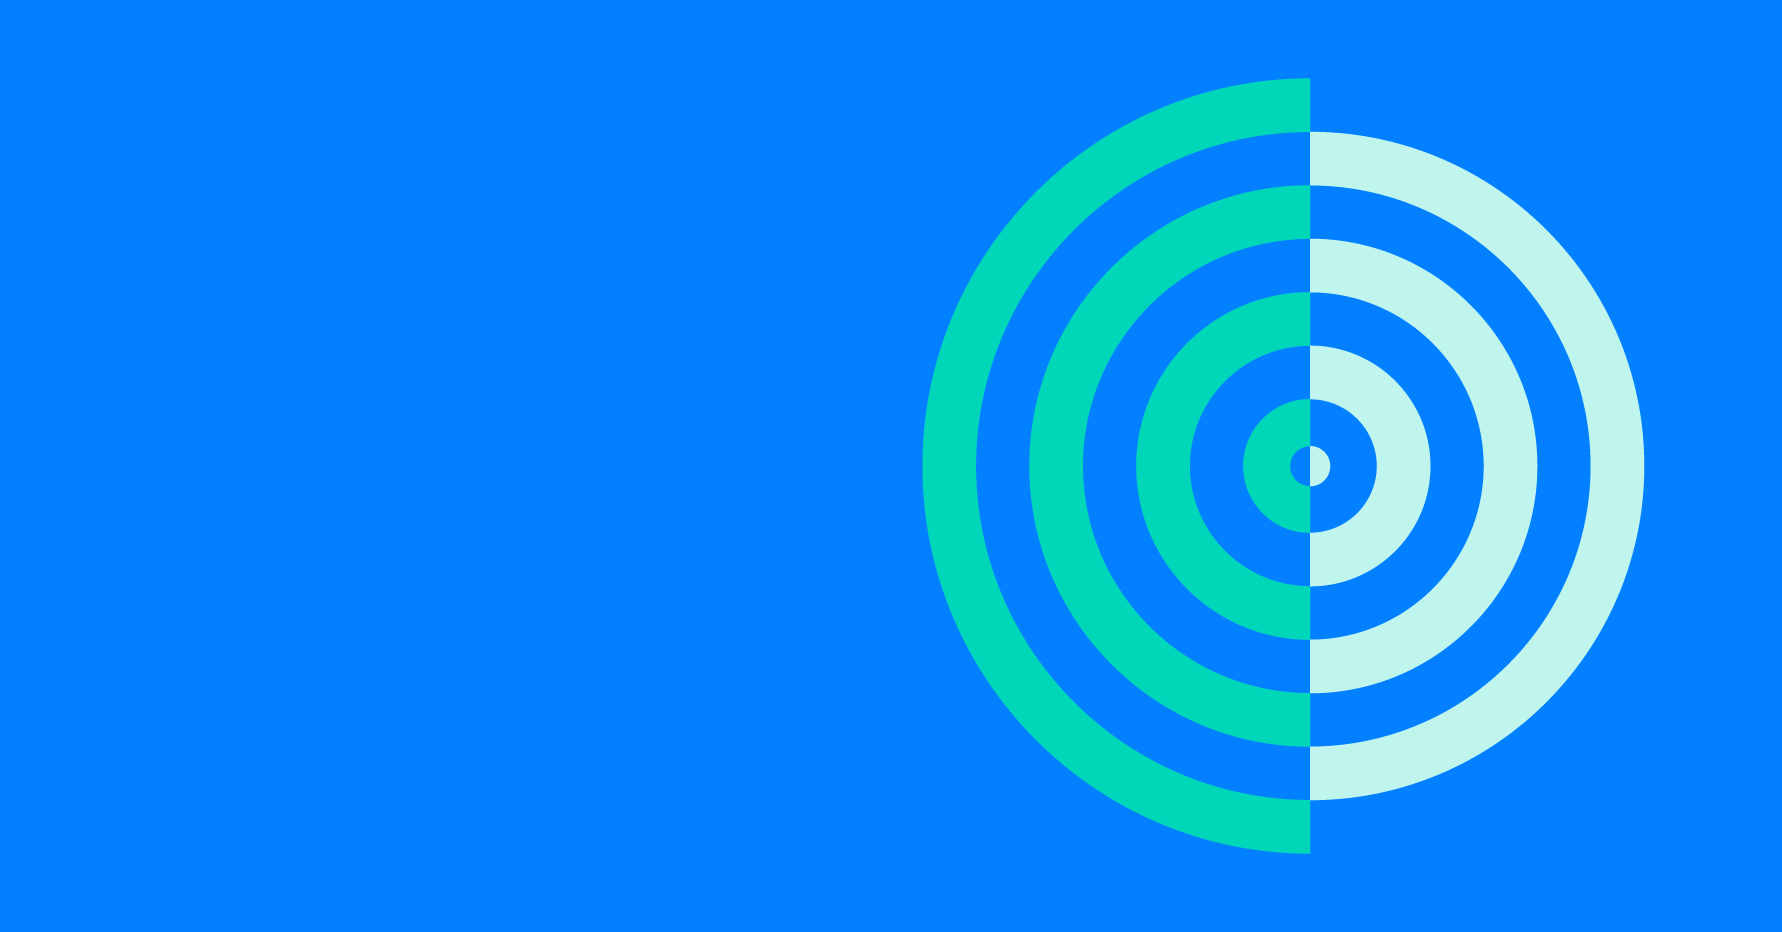 Graphic illustration of two different colored semicircle bullseye patterns spliced together